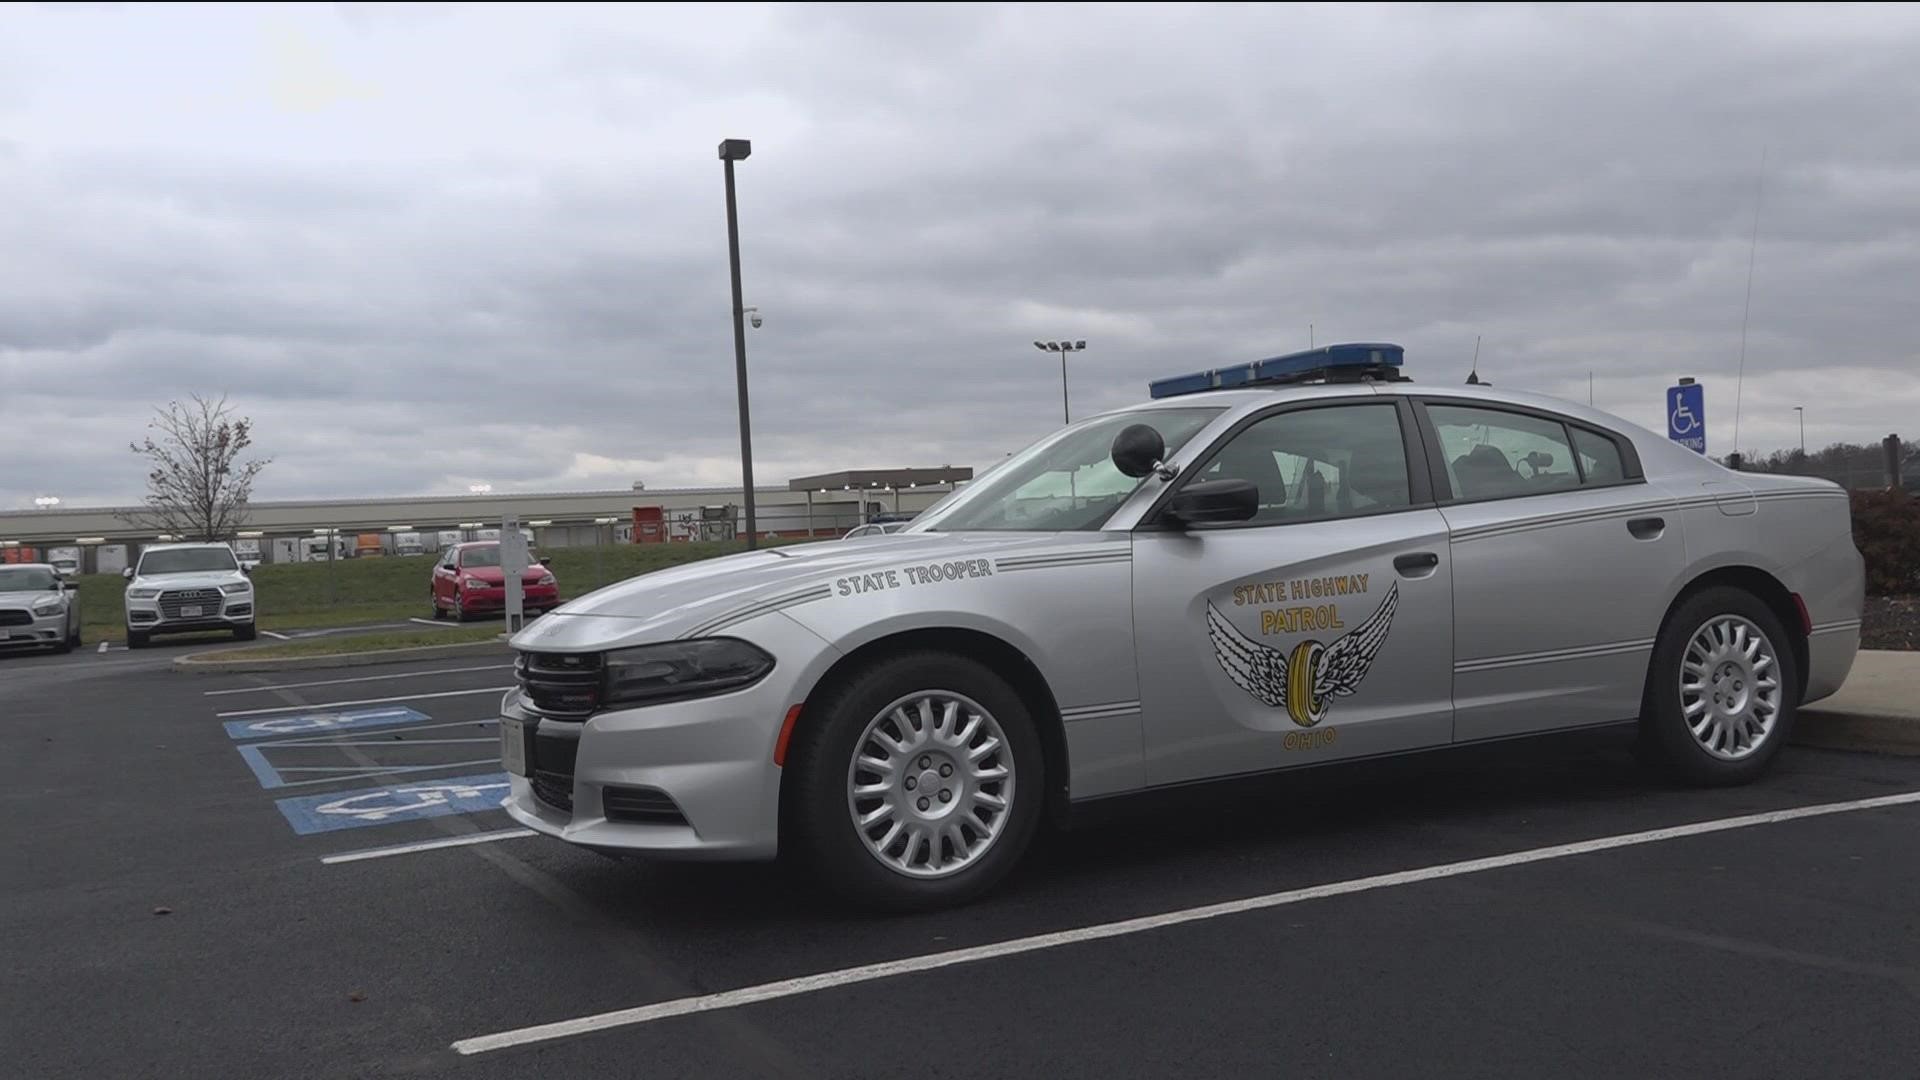 OSHP is targeting applicants from 21 to 30 years old. Those who are accepted must go through a six-month academy process and will get paid $18.66 an hour.